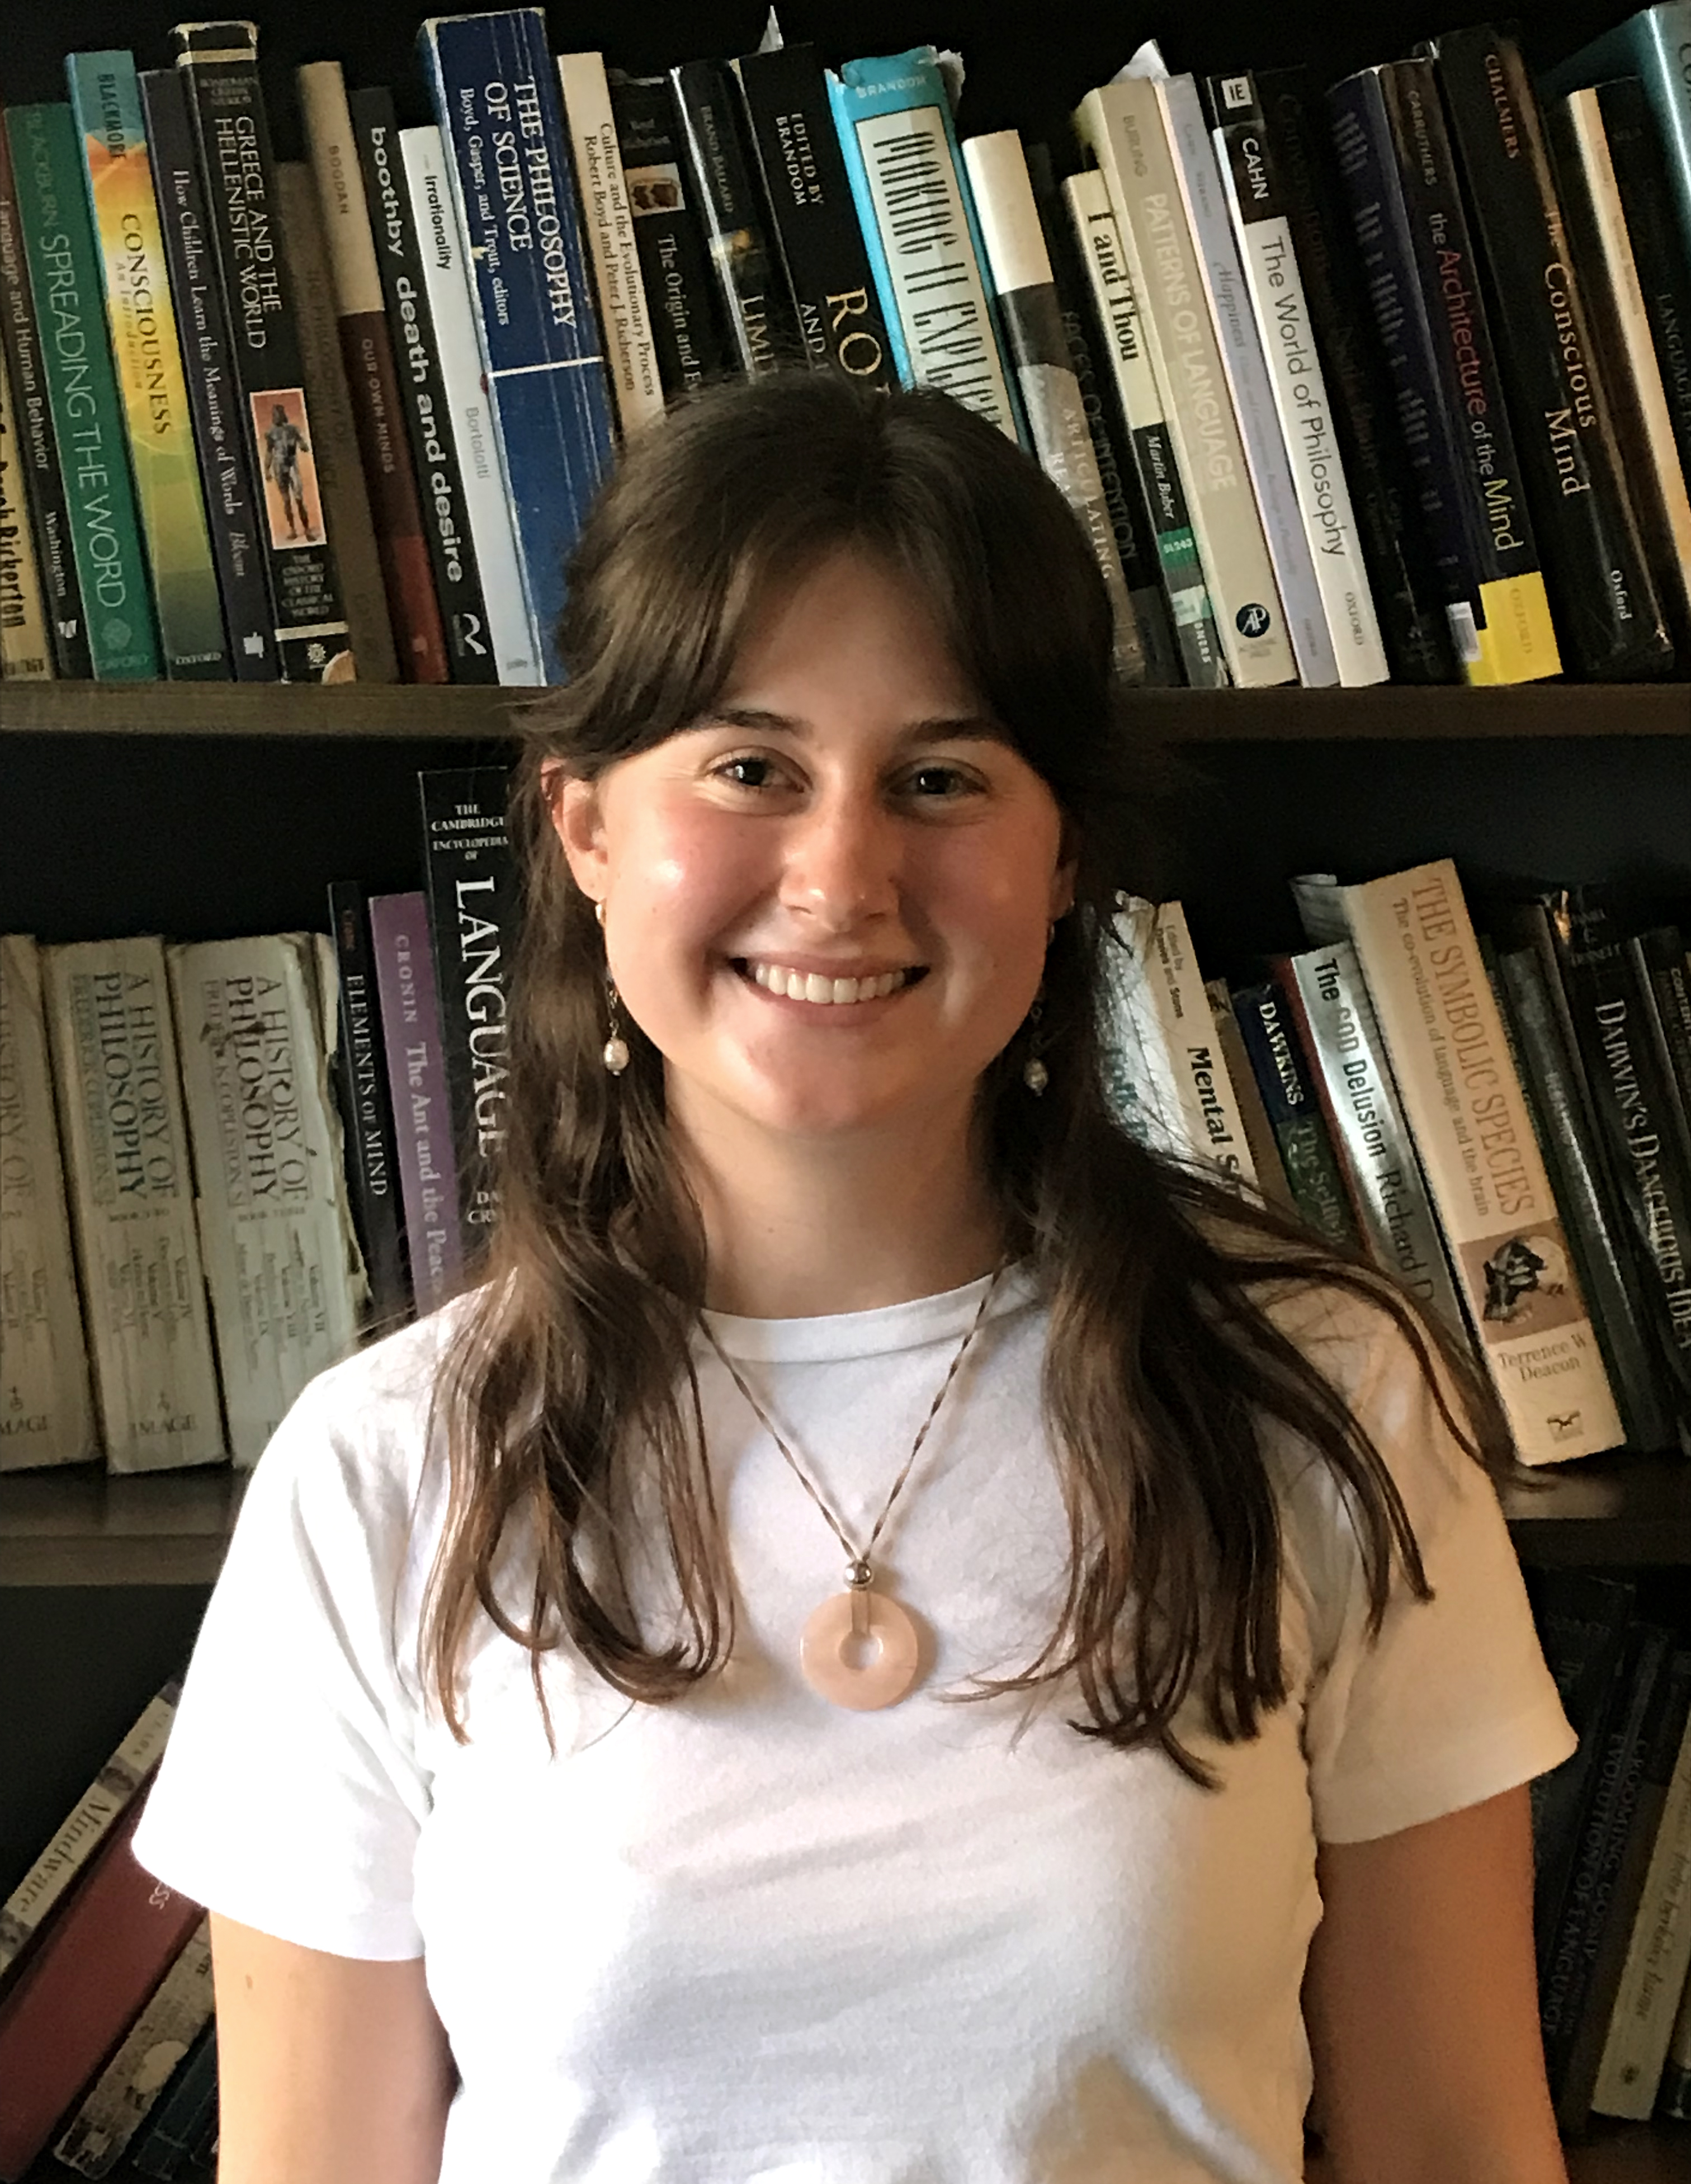 Ella smiles at the camera while standing in front of a bookshelf. She wears a white t-shirt and a necklace, and her straight brown hair falls past her shoulders.